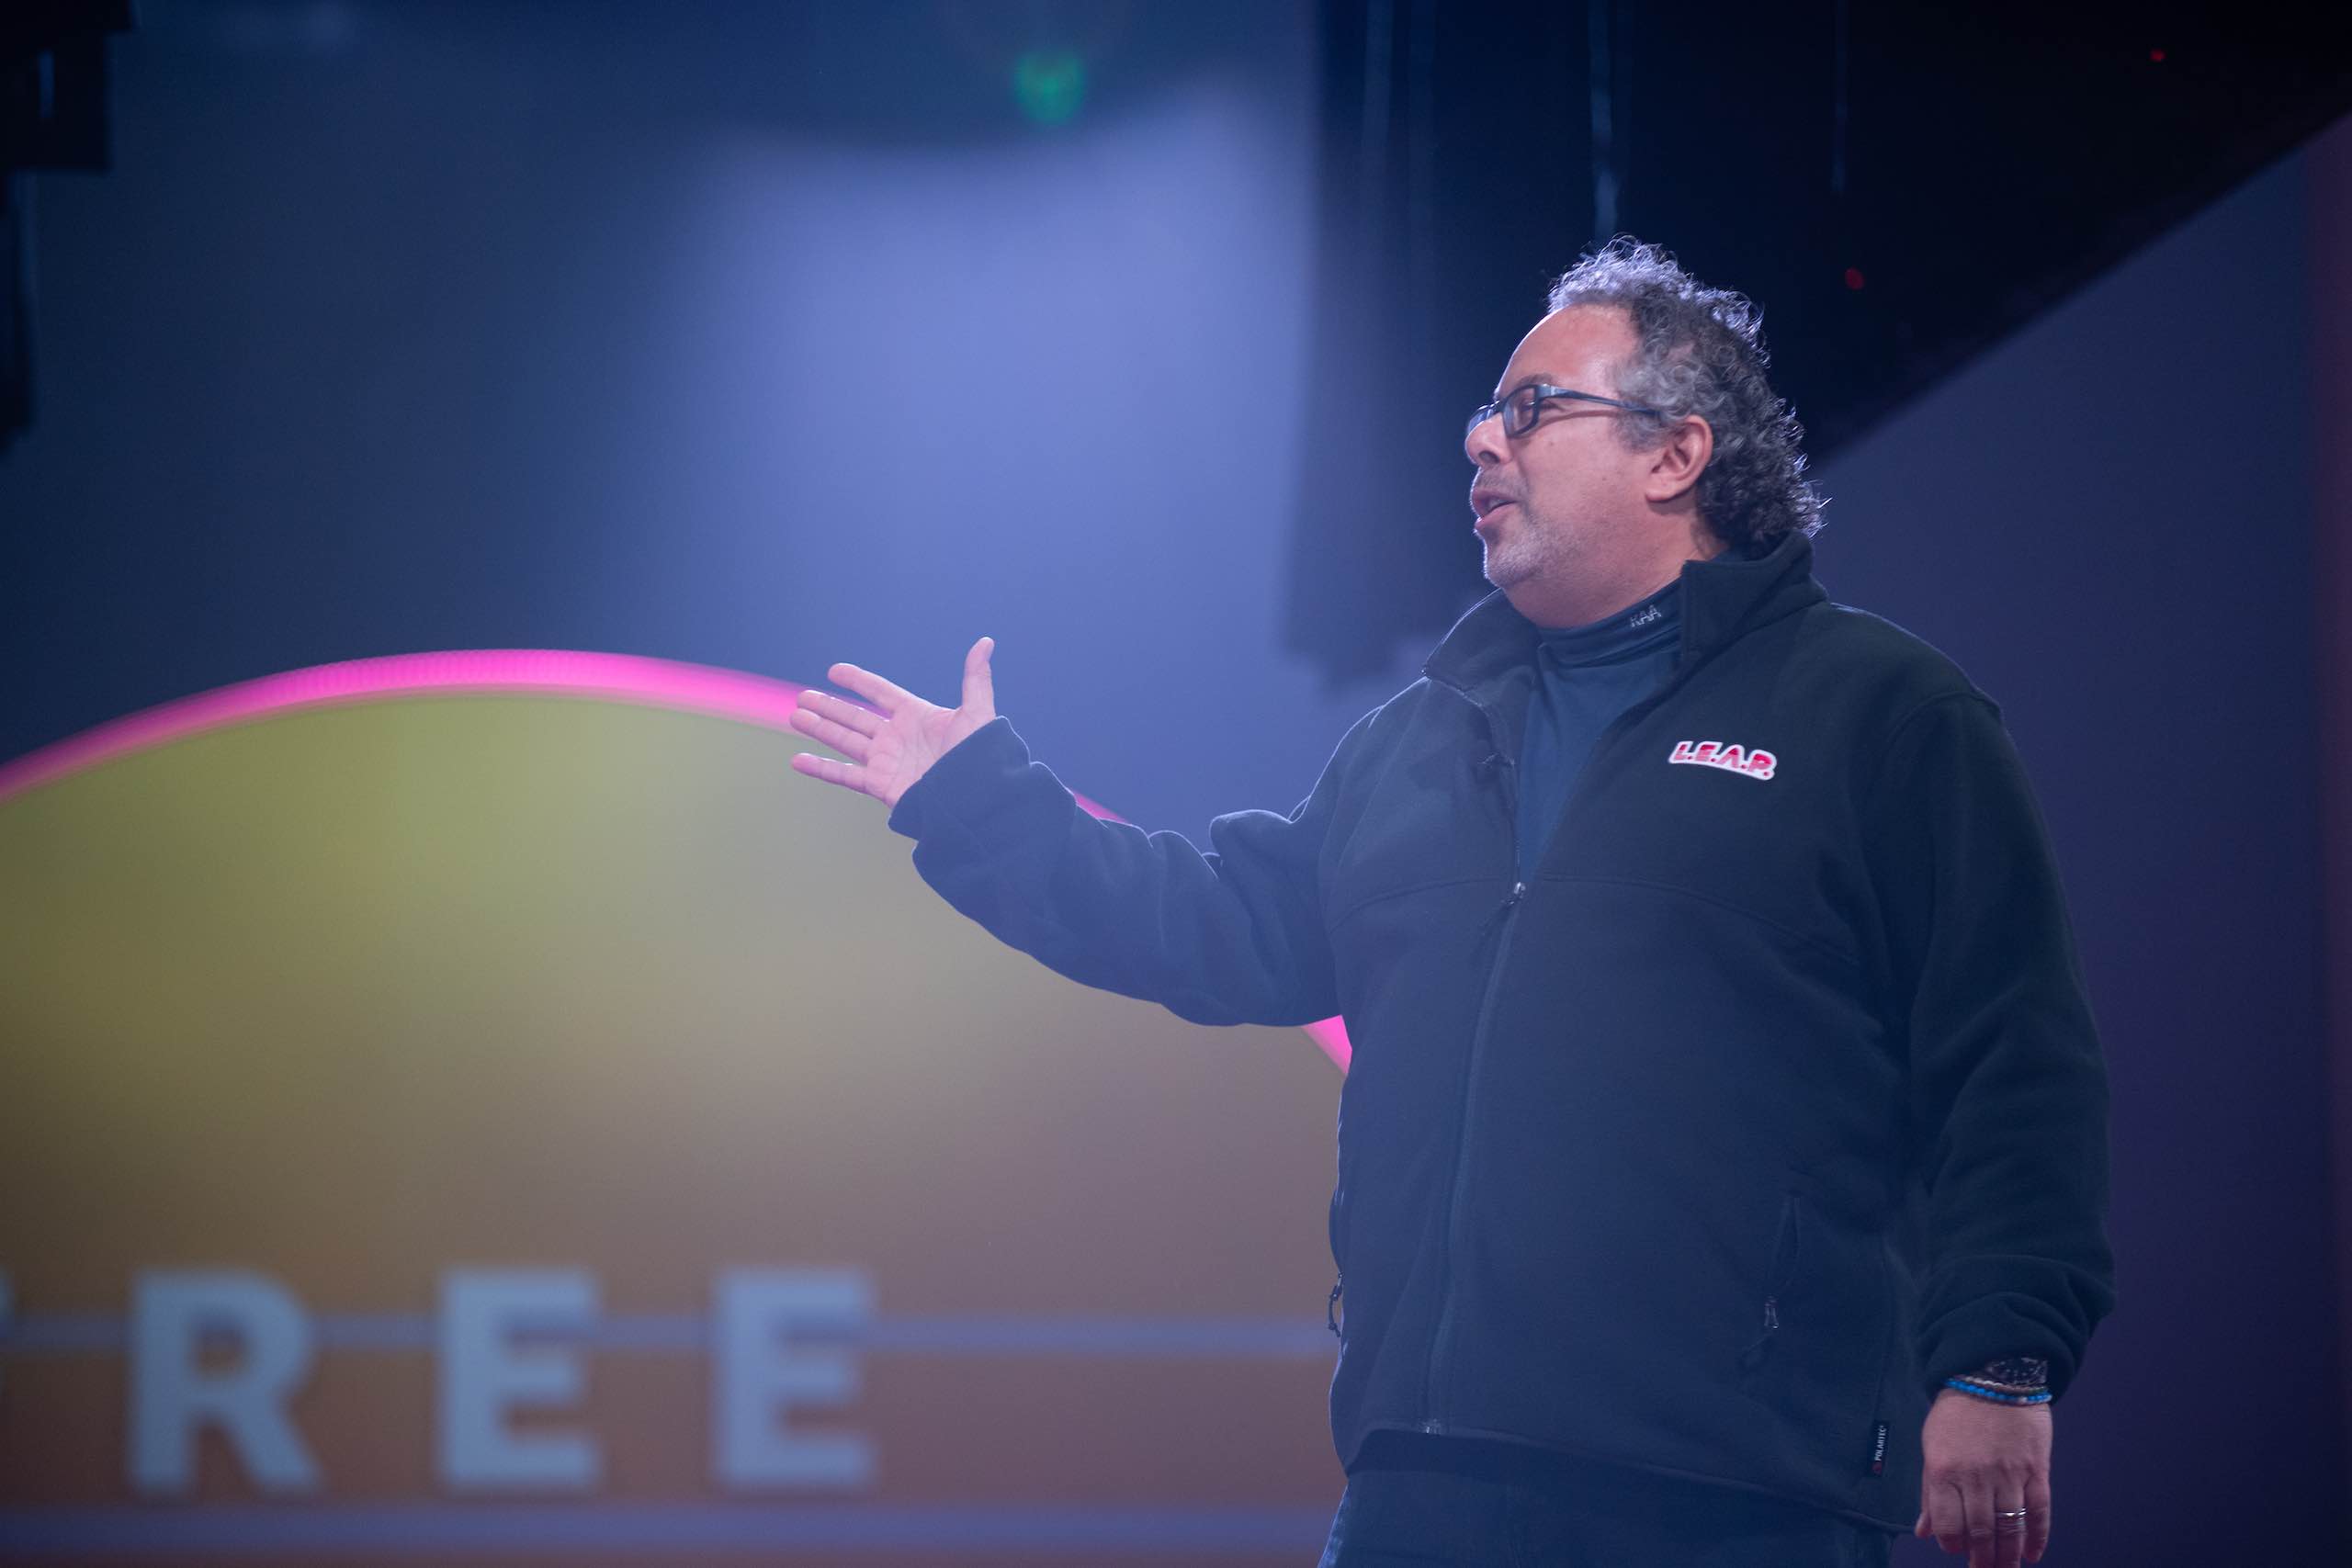 Side profile of man wearing glasses standing on stage at a Free Your Mind event